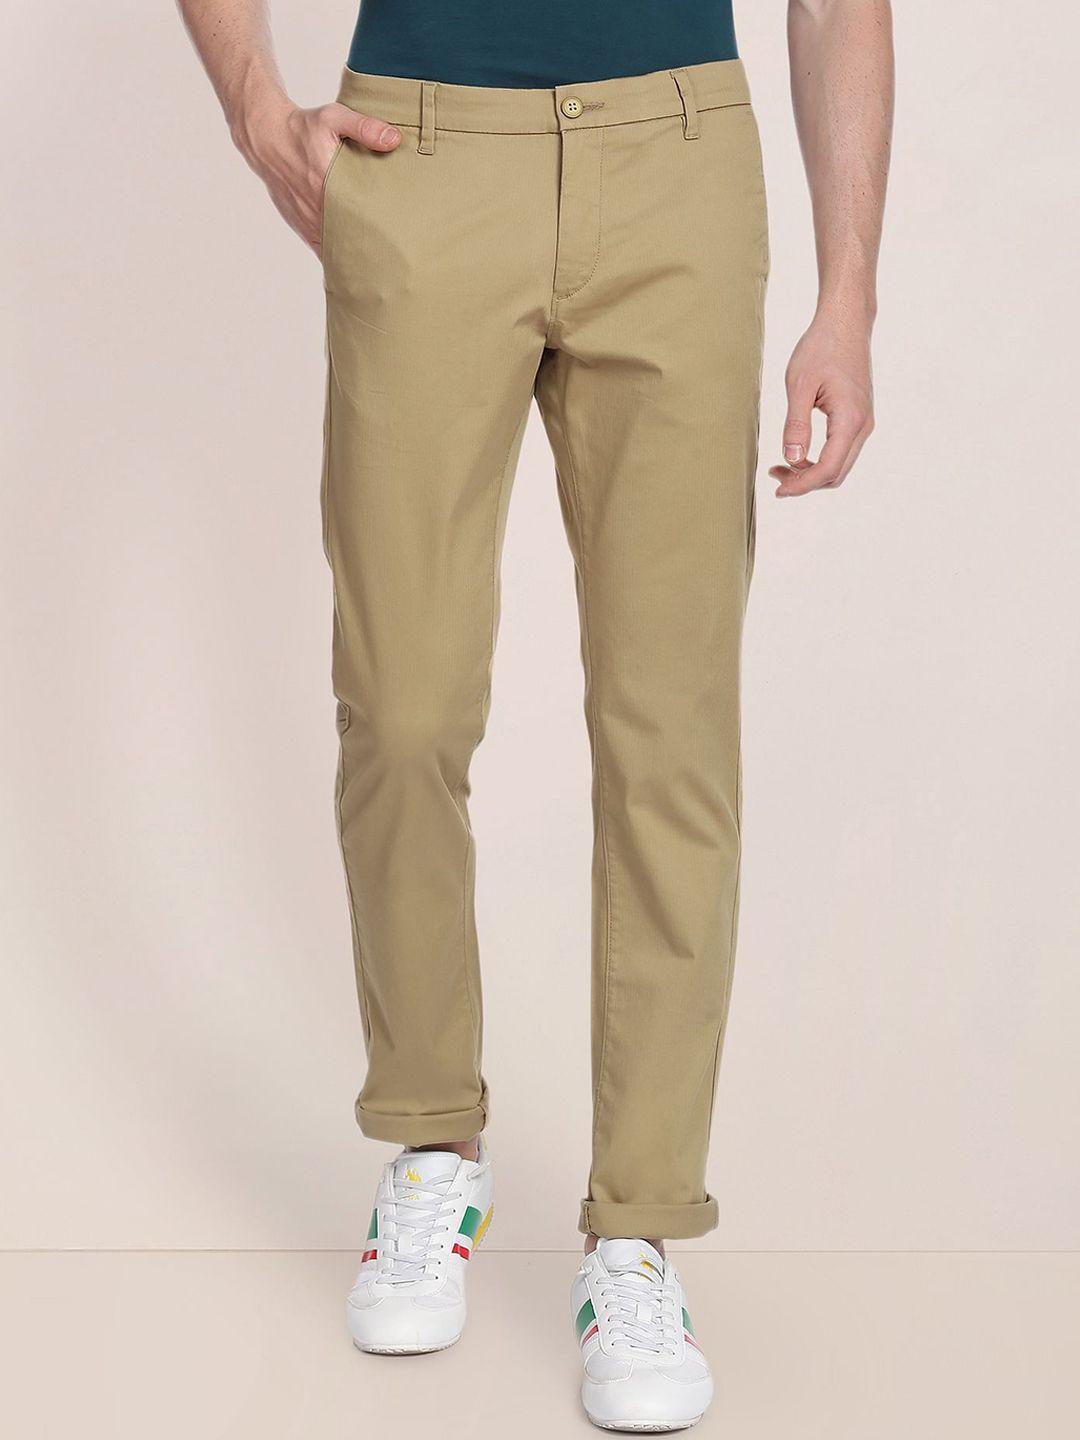 u.s. polo assn. men cotton slim fit chinos trousers